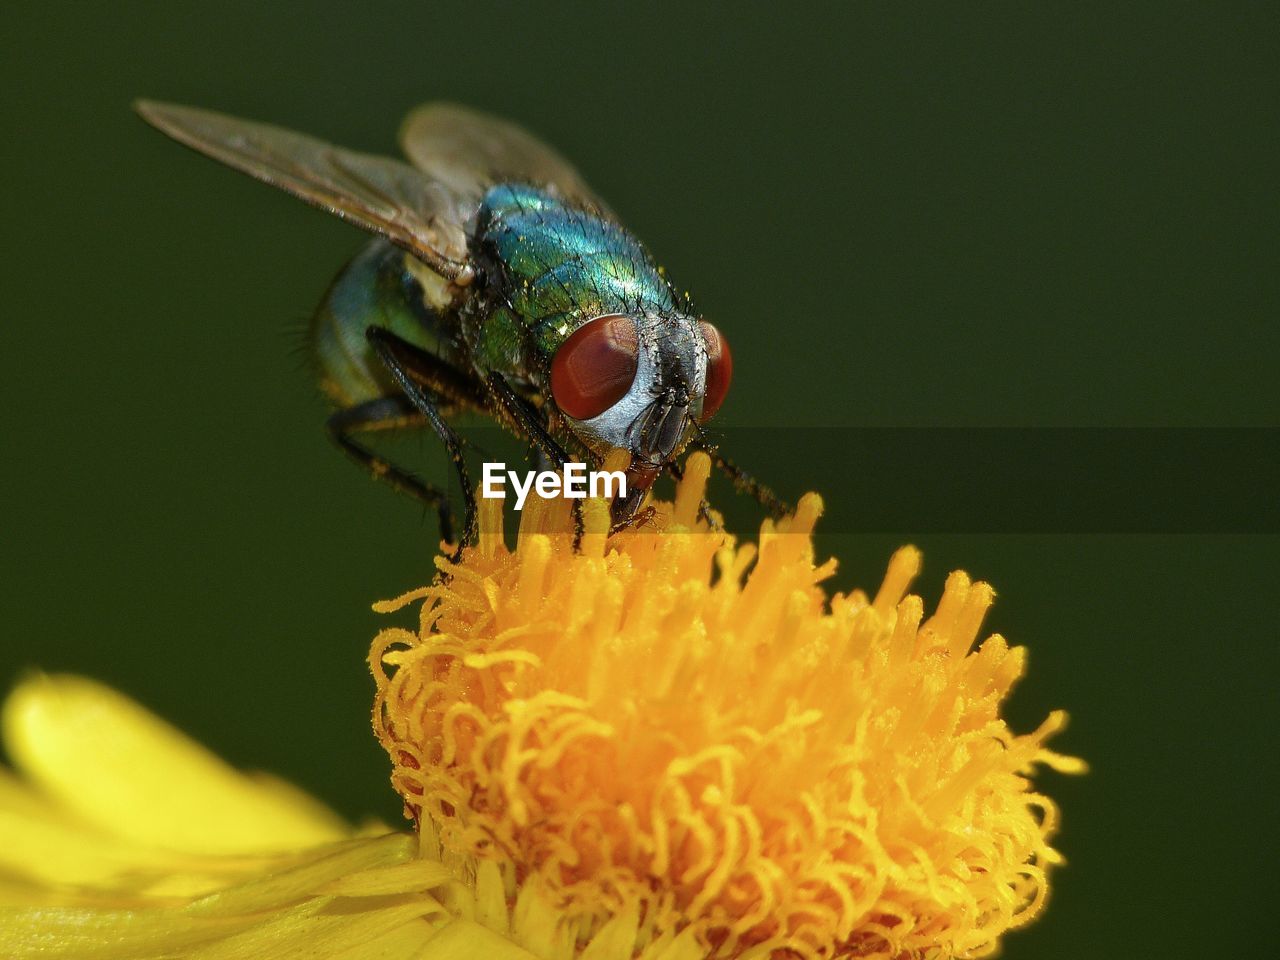 Close-up of greenbottle fly on yellow flower